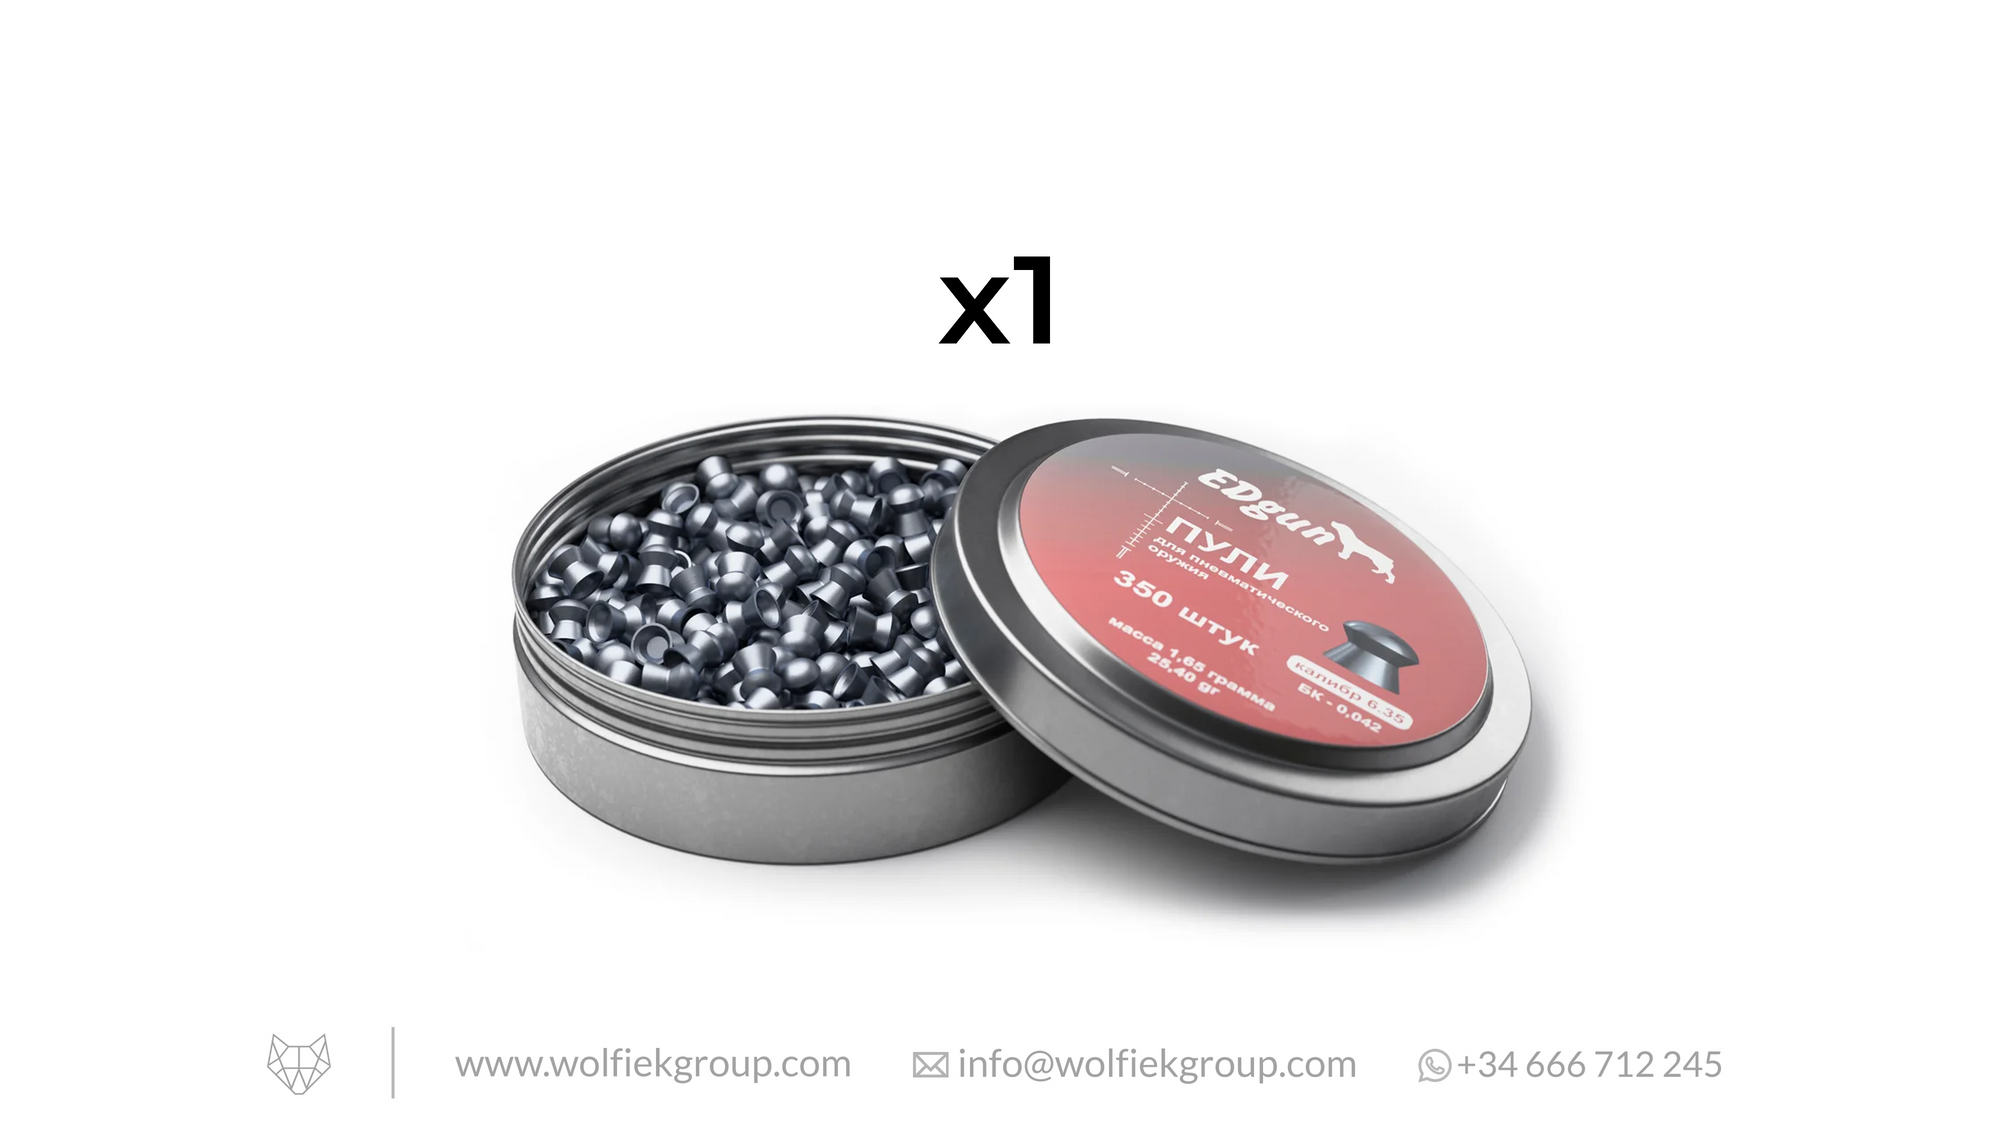 EDgun Premium Pellets Cal .25 (6,35mm) Weight 1,65g (25,40gr) with text buy 4 get 1 for free